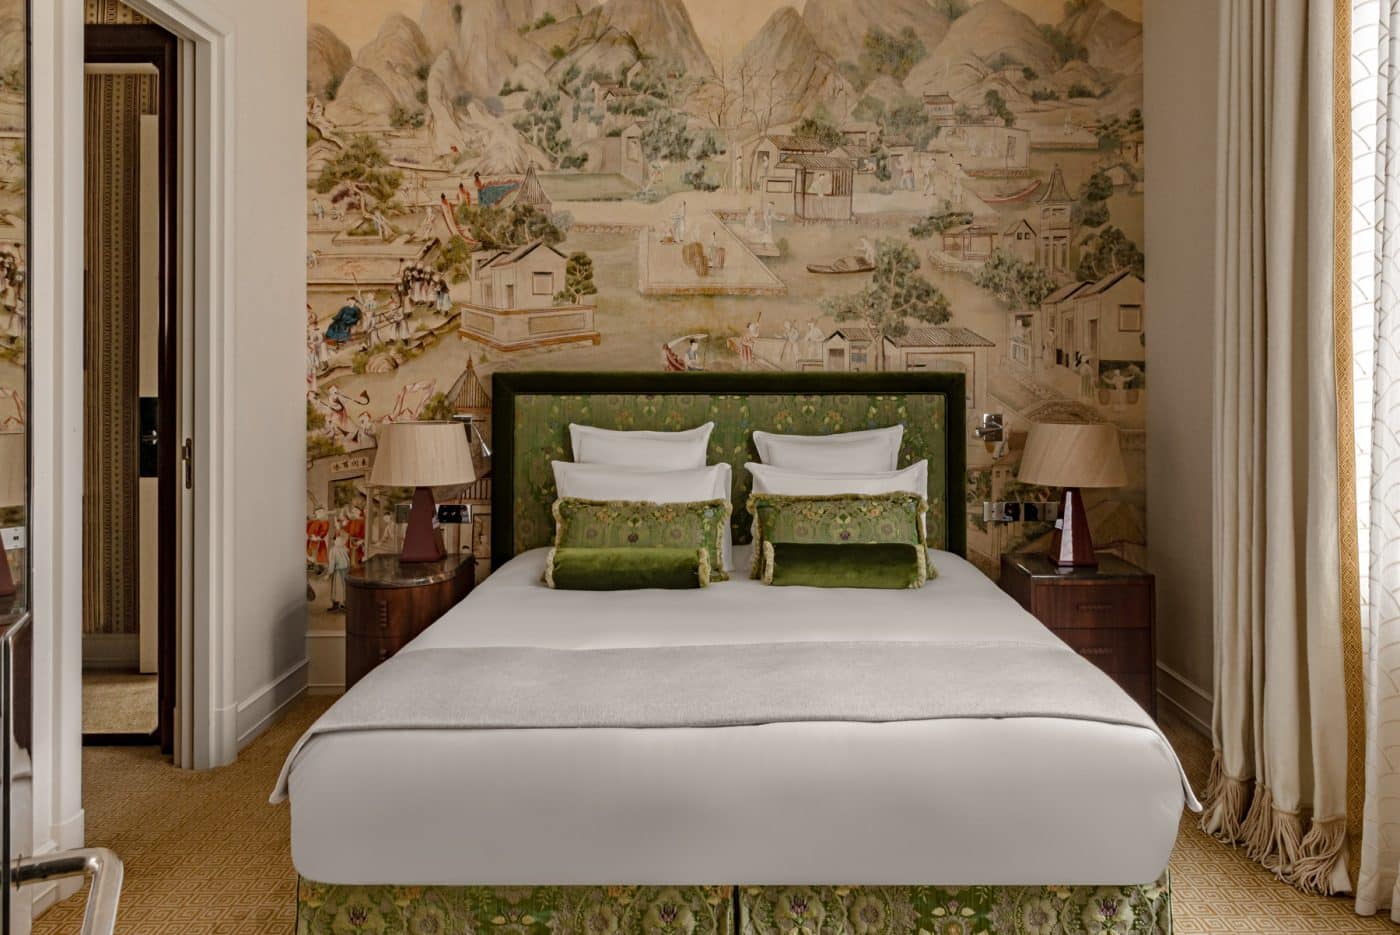 ​Gonzalez designed the b​edside tables and lamps ​for ​the Saint James. Iksel ​produced the ​Japanese-inspired wall covering. Lelièvre made the upholstery on the headboard, pillows and bedskirt, and the wall fabric is ​​Pierre Frey​.​